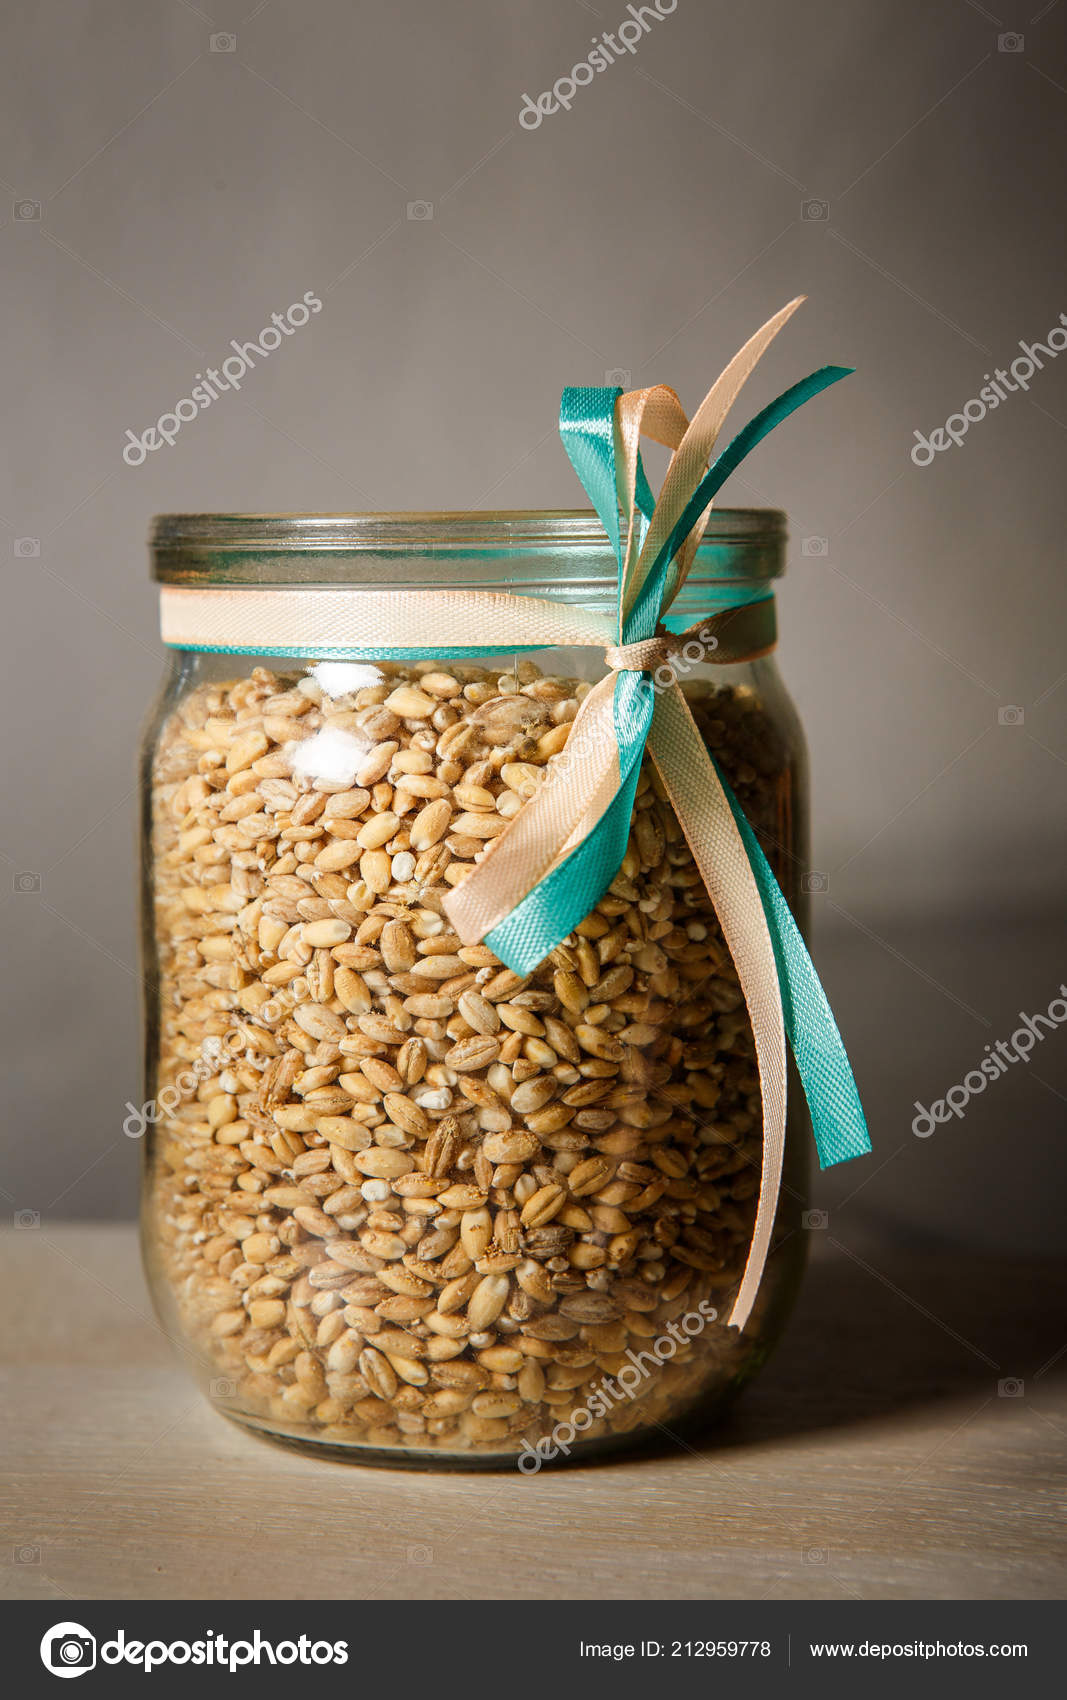 Opened Glass Jar Decorated White Blue Ribbons Filled Wheat